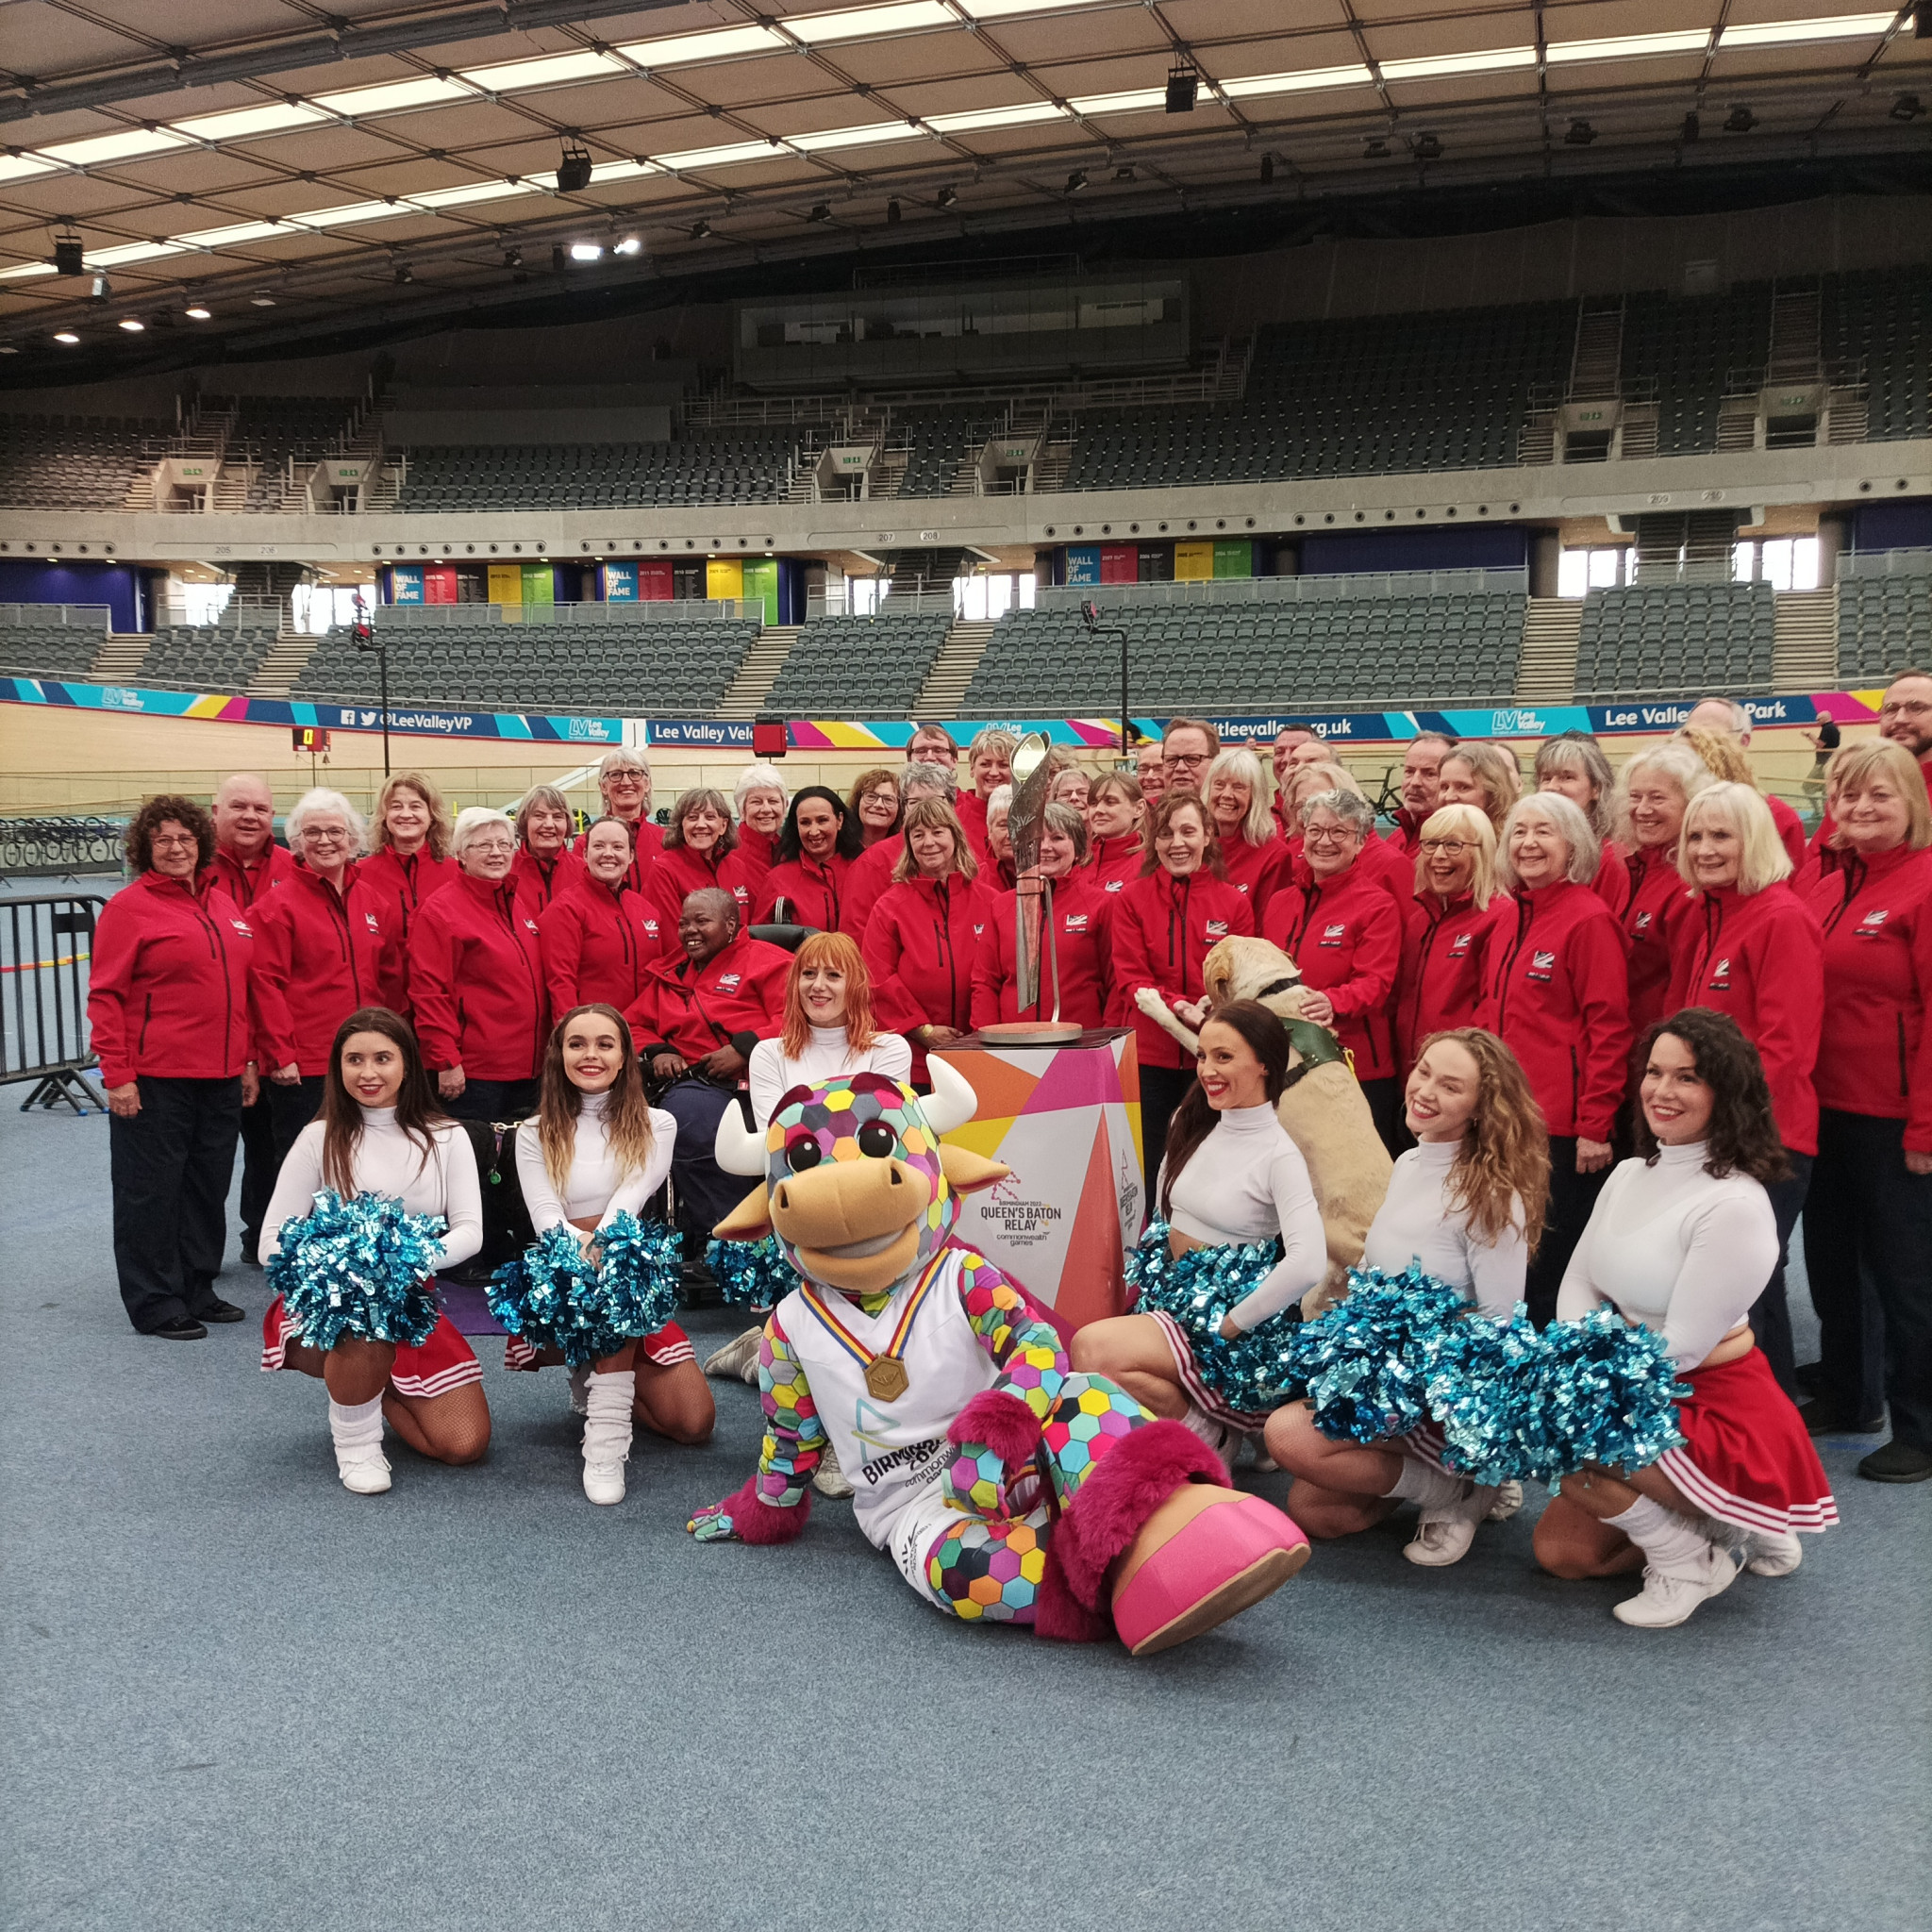 Birmingham 2022 mascot Perry last weekend welcomed the Queen's Baton Relay to the Lee Valley VeloPark where Commonwealth Games cycling will take place ©ITG